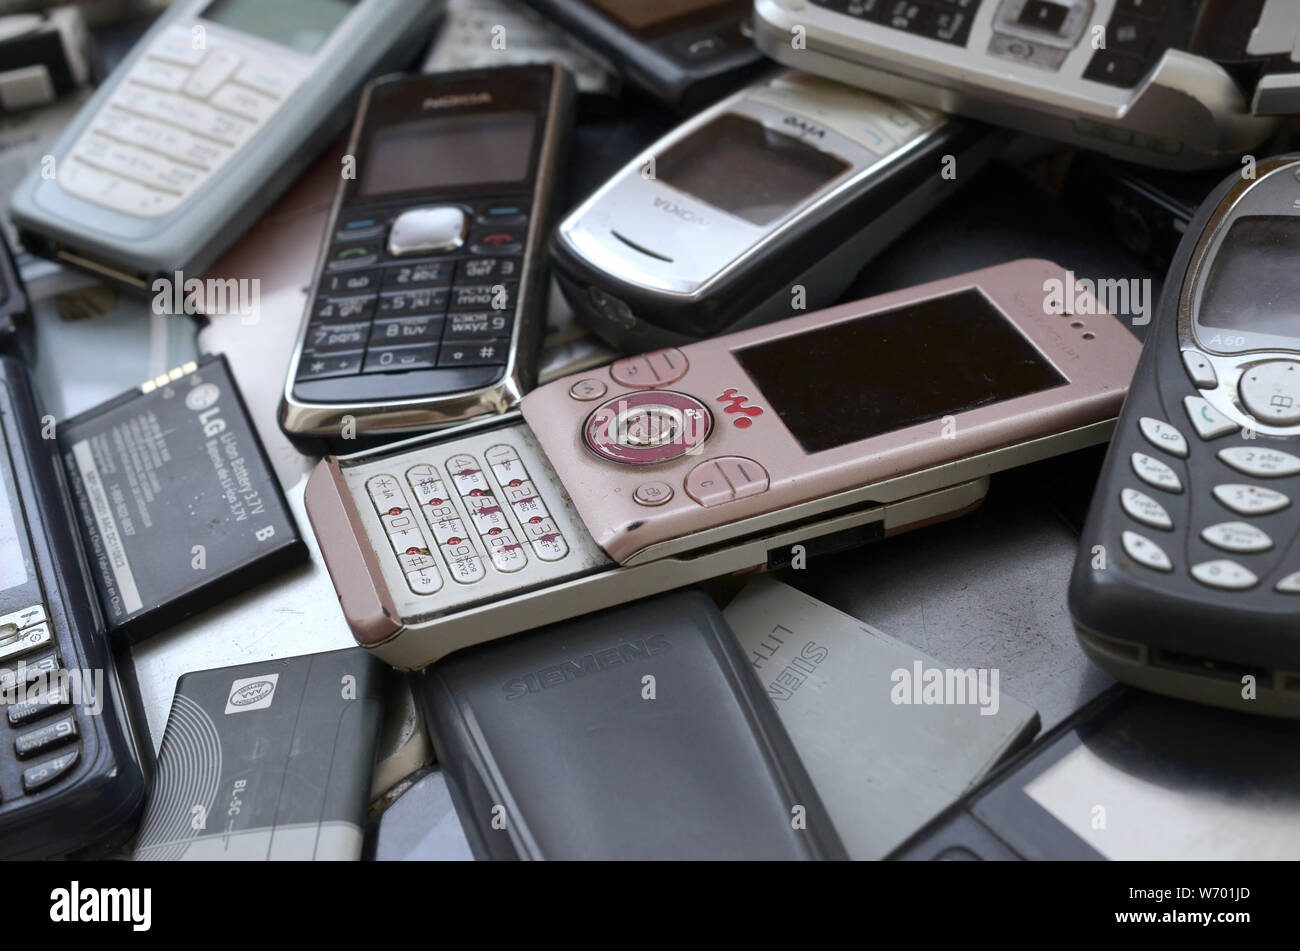 KHARKIV, UKRAINE - JULY 30, 2019: Bunch of old used outdated mobile phones and batteries. Recycling electronics of many brands lies in big pile close Stock Photo